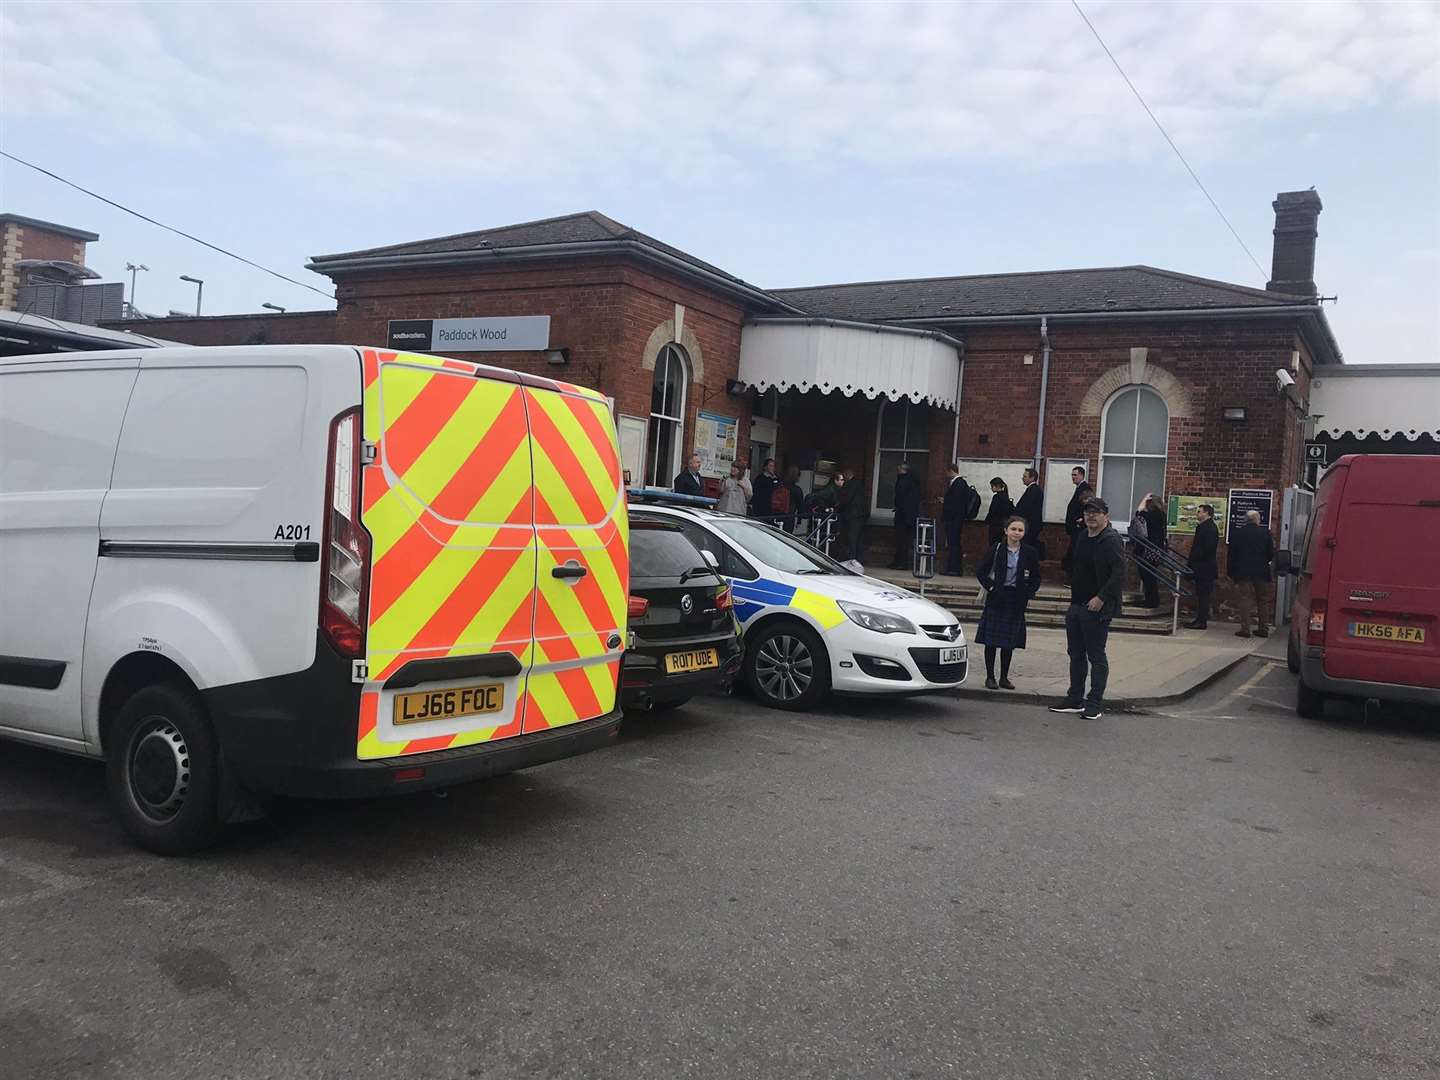 Passengers queuing at Paddock Wood station after the break-in. Picture: @PaddockWoodLife (9068888)